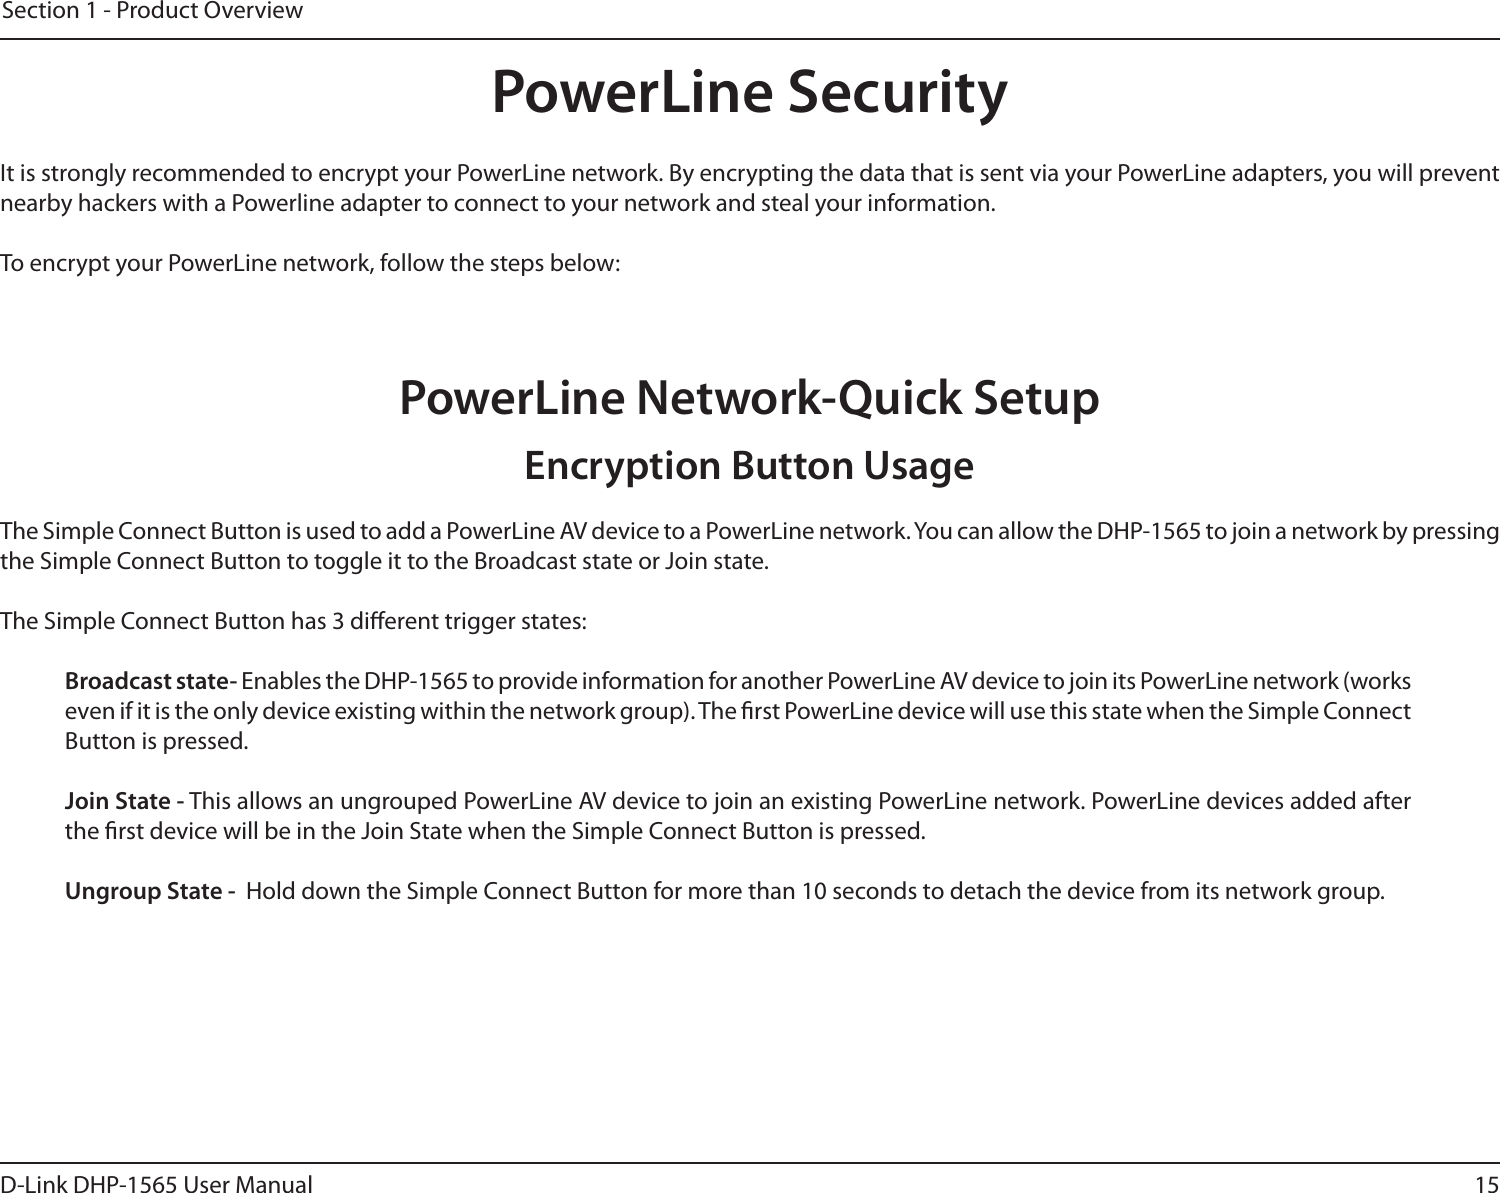 15D-Link DHP-1565 User ManualSection 1 - Product OverviewPowerLine SecurityIt is strongly recommended to encrypt your PowerLine network. By encrypting the data that is sent via your PowerLine adapters, you will prevent nearby hackers with a Powerline adapter to connect to your network and steal your information.To encrypt your PowerLine network, follow the steps below:PowerLine Network-Quick SetupThe Simple Connect Button is used to add a PowerLine AV device to a PowerLine network. You can allow the DHP-1565 to join a network by pressing the Simple Connect Button to toggle it to the Broadcast state or Join state.The Simple Connect Button has 3 dierent trigger states:  Broadcast state- Enables the DHP-1565 to provide information for another PowerLine AV device to join its PowerLine network (works even if it is the only device existing within the network group). The rst PowerLine device will use this state when the Simple Connect Button is pressed.  Join State - This allows an ungrouped PowerLine AV device to join an existing PowerLine network. PowerLine devices added after the rst device will be in the Join State when the Simple Connect Button is pressed. Ungroup State -  Hold down the Simple Connect Button for more than 10 seconds to detach the device from its network group. Encryption Button Usage